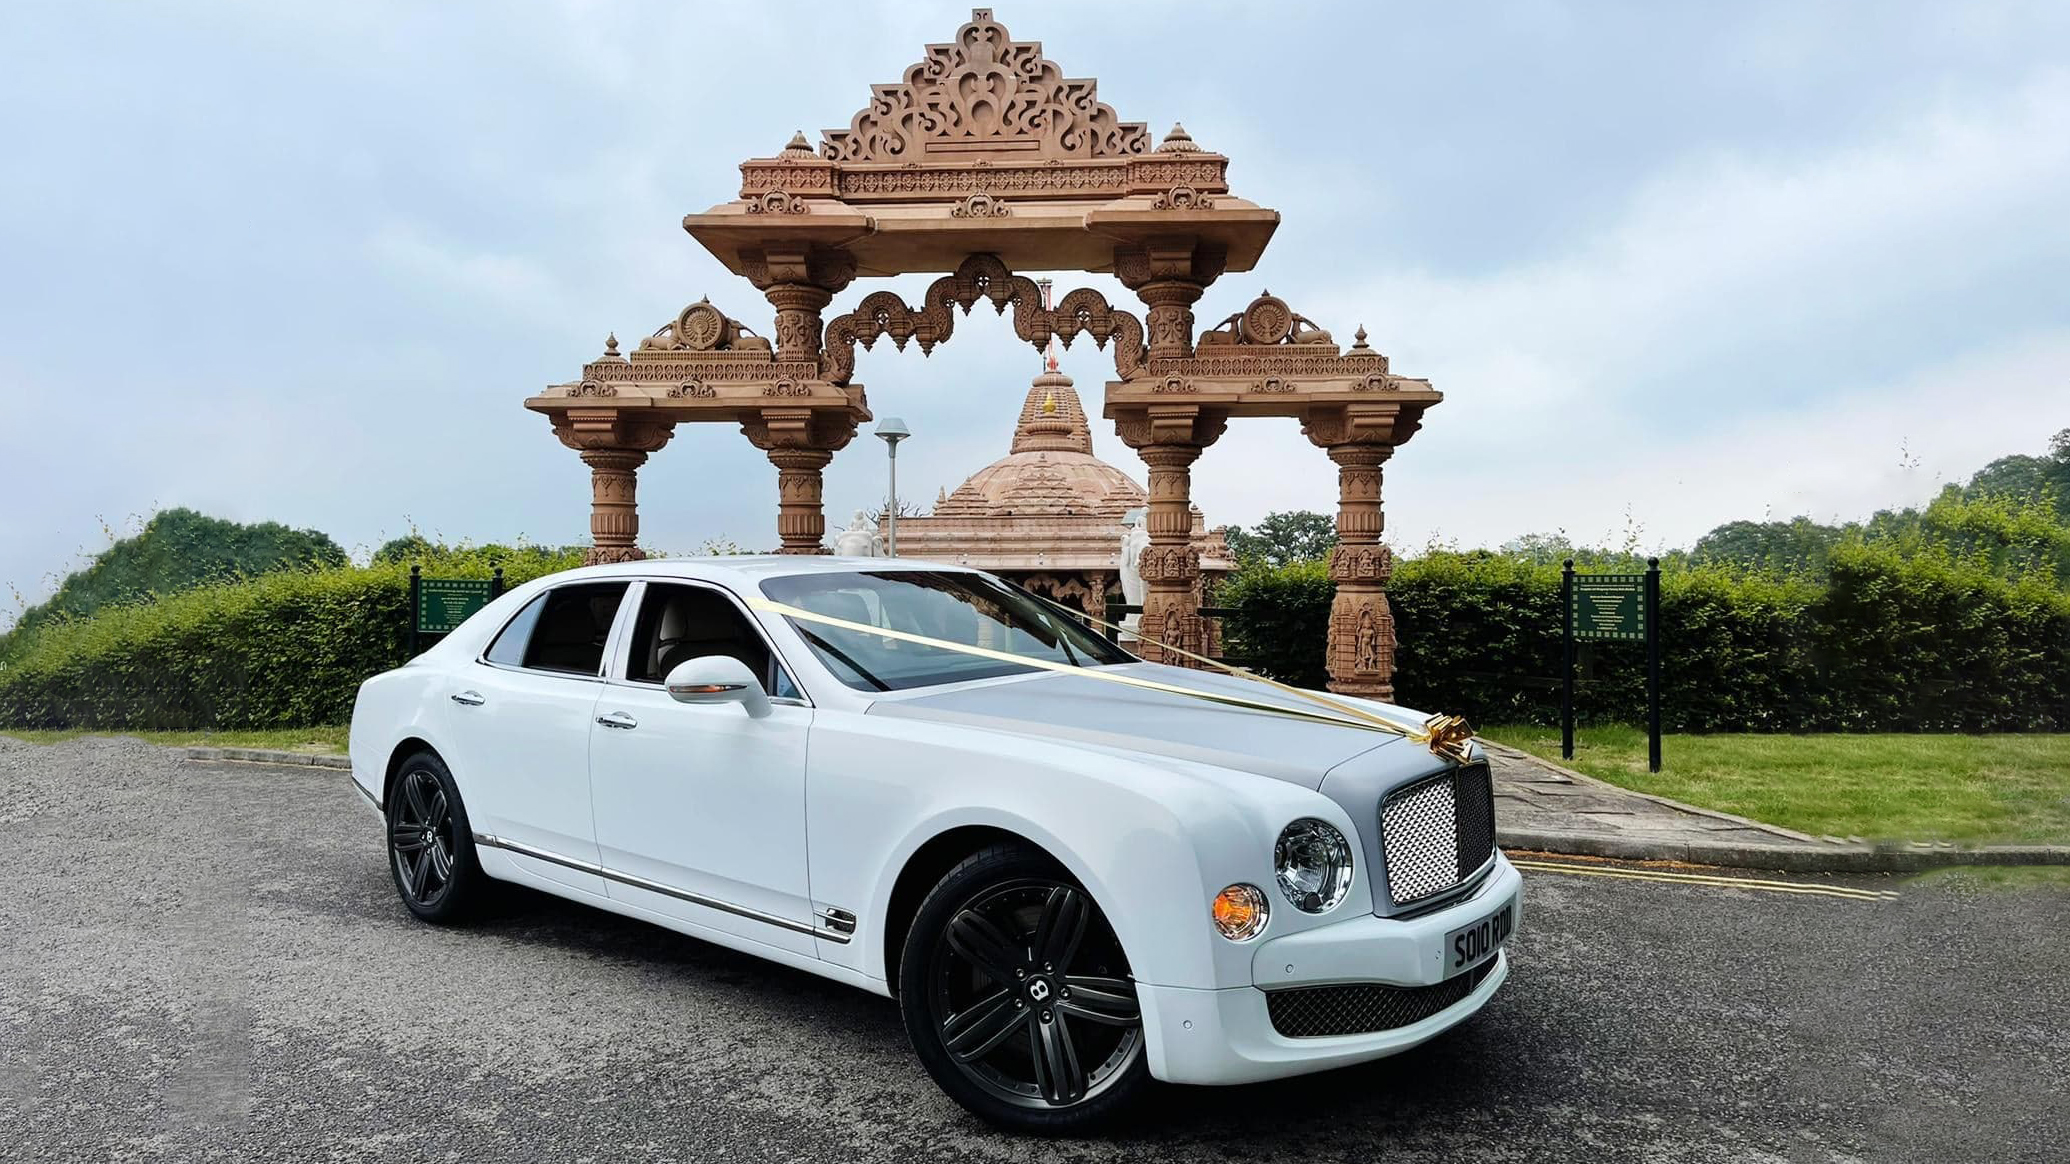 White Bentley Mulsanne with silver brushed bonnet decorated with Gold ribbons parked in front of an Asian Temple in Hertfordshire